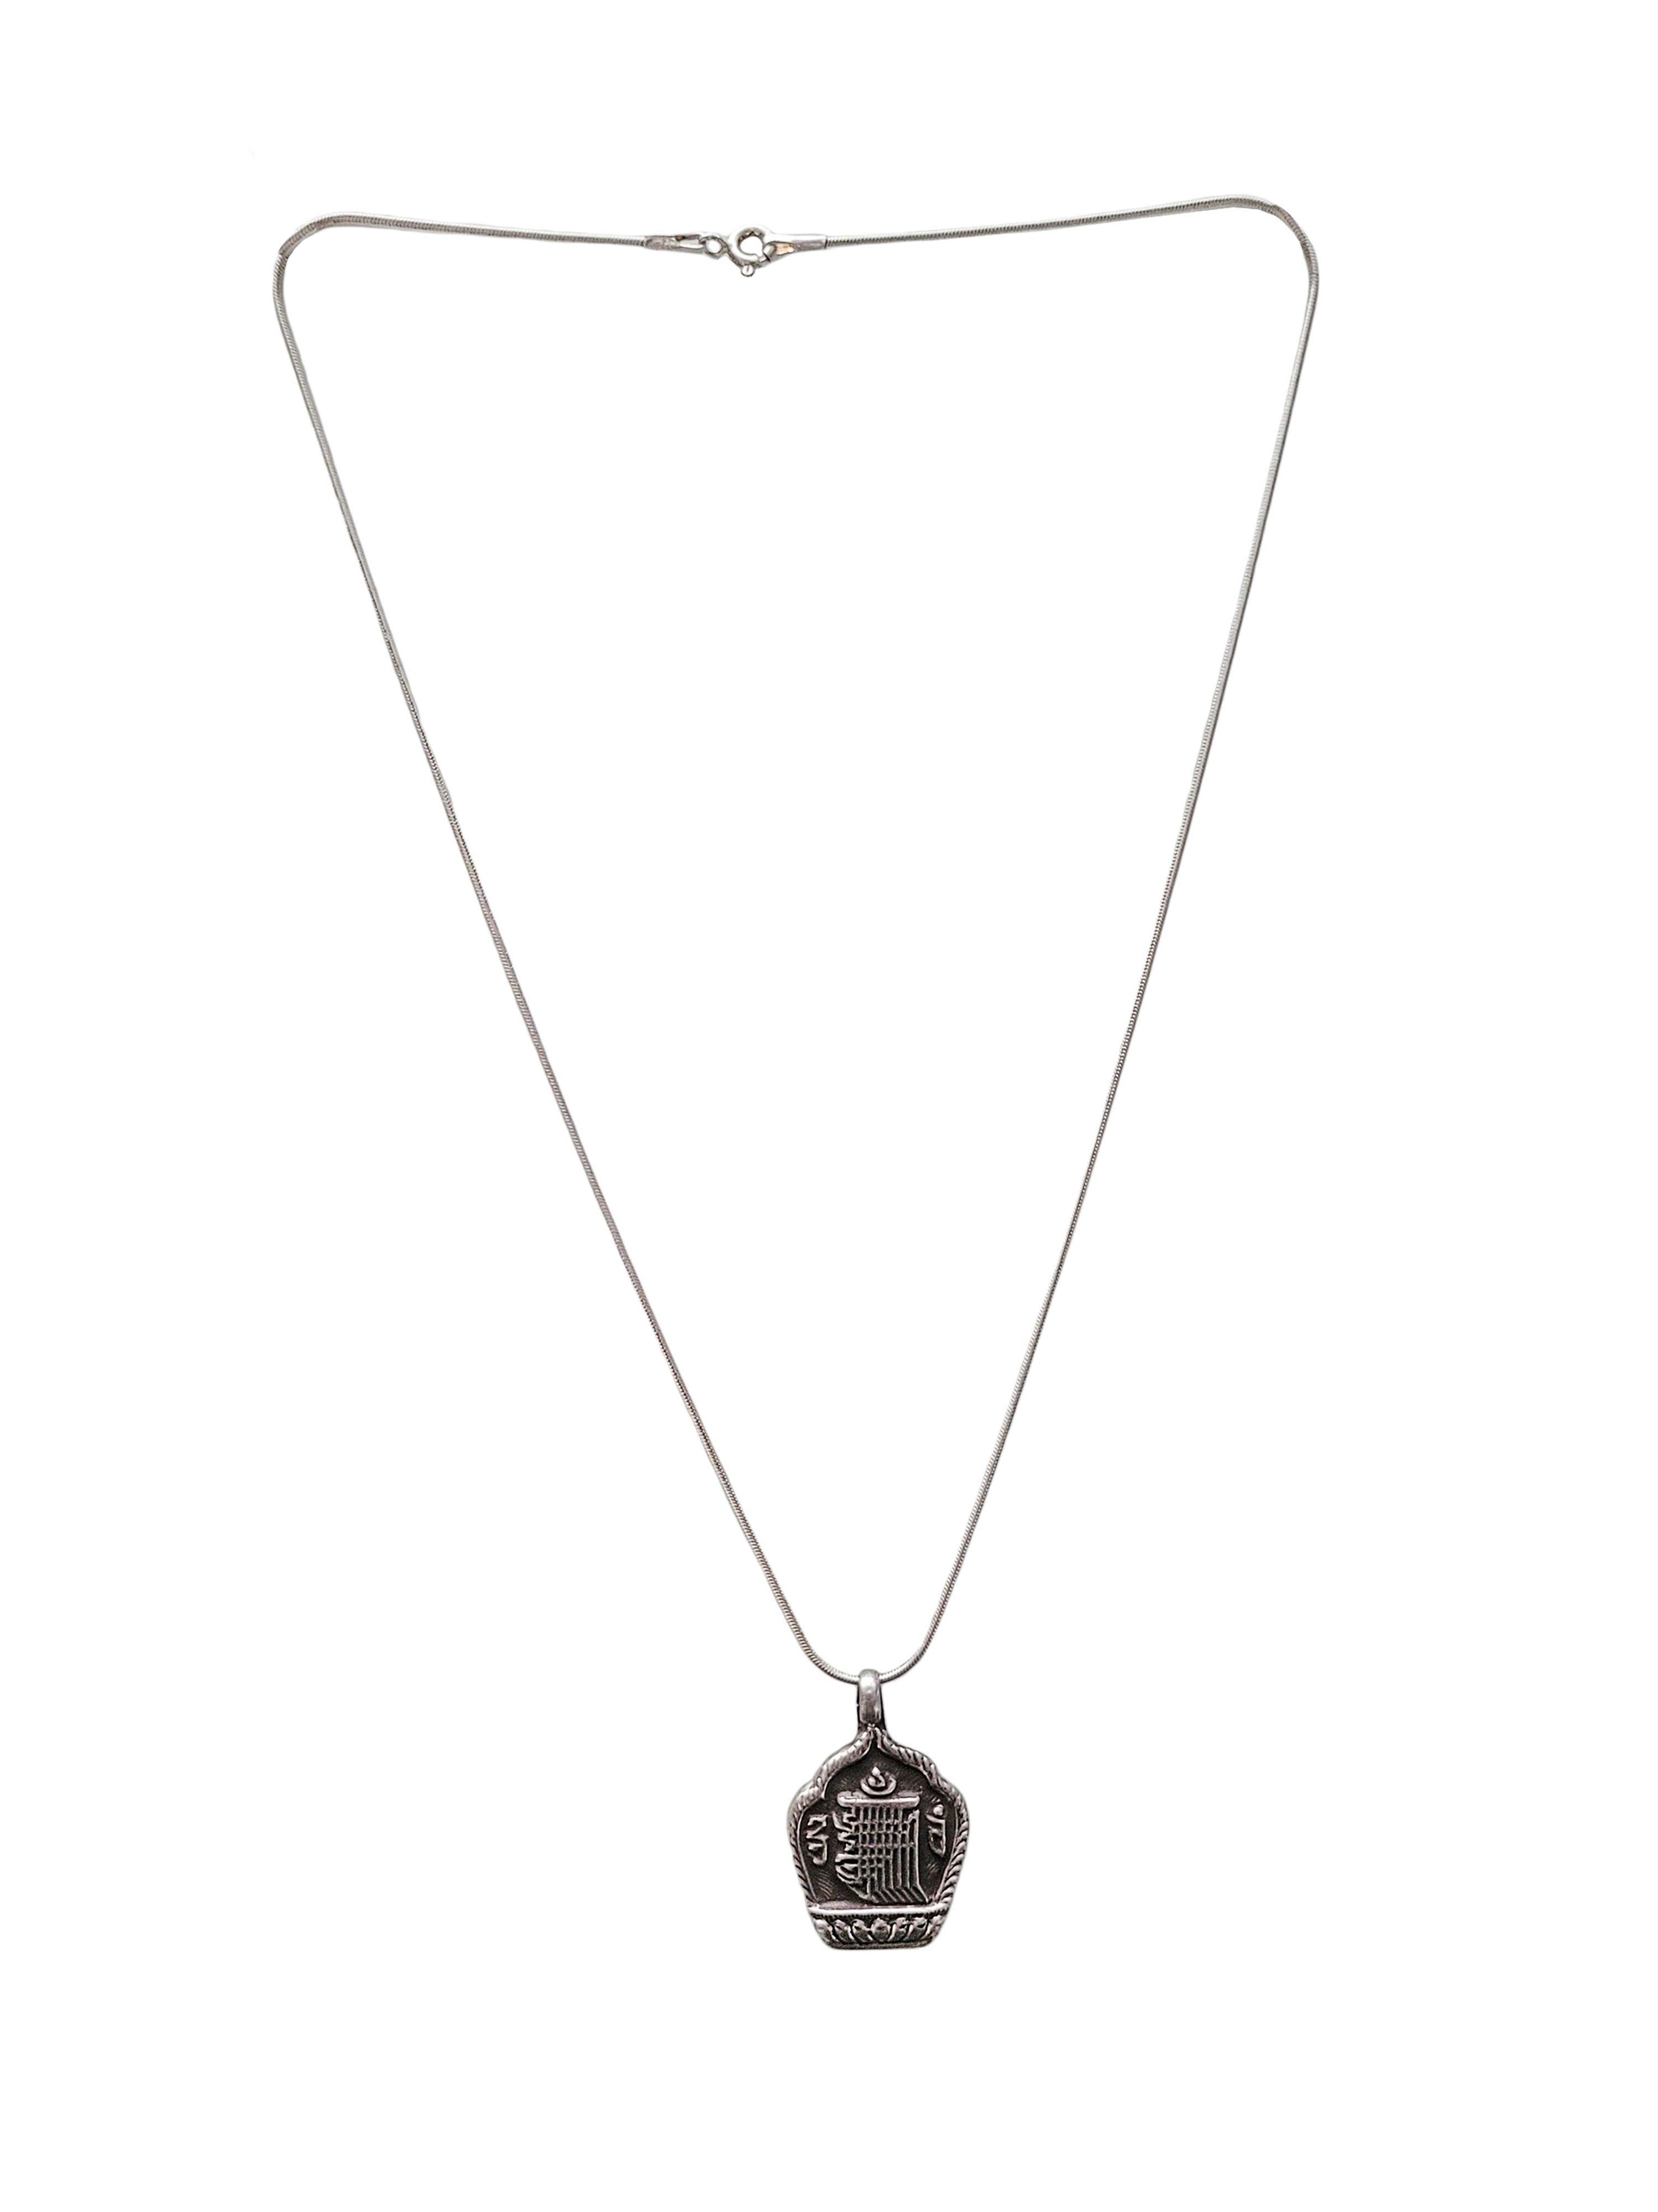 pendant, Buddhist Silver Amulet With kalachakra, silver Chain Included